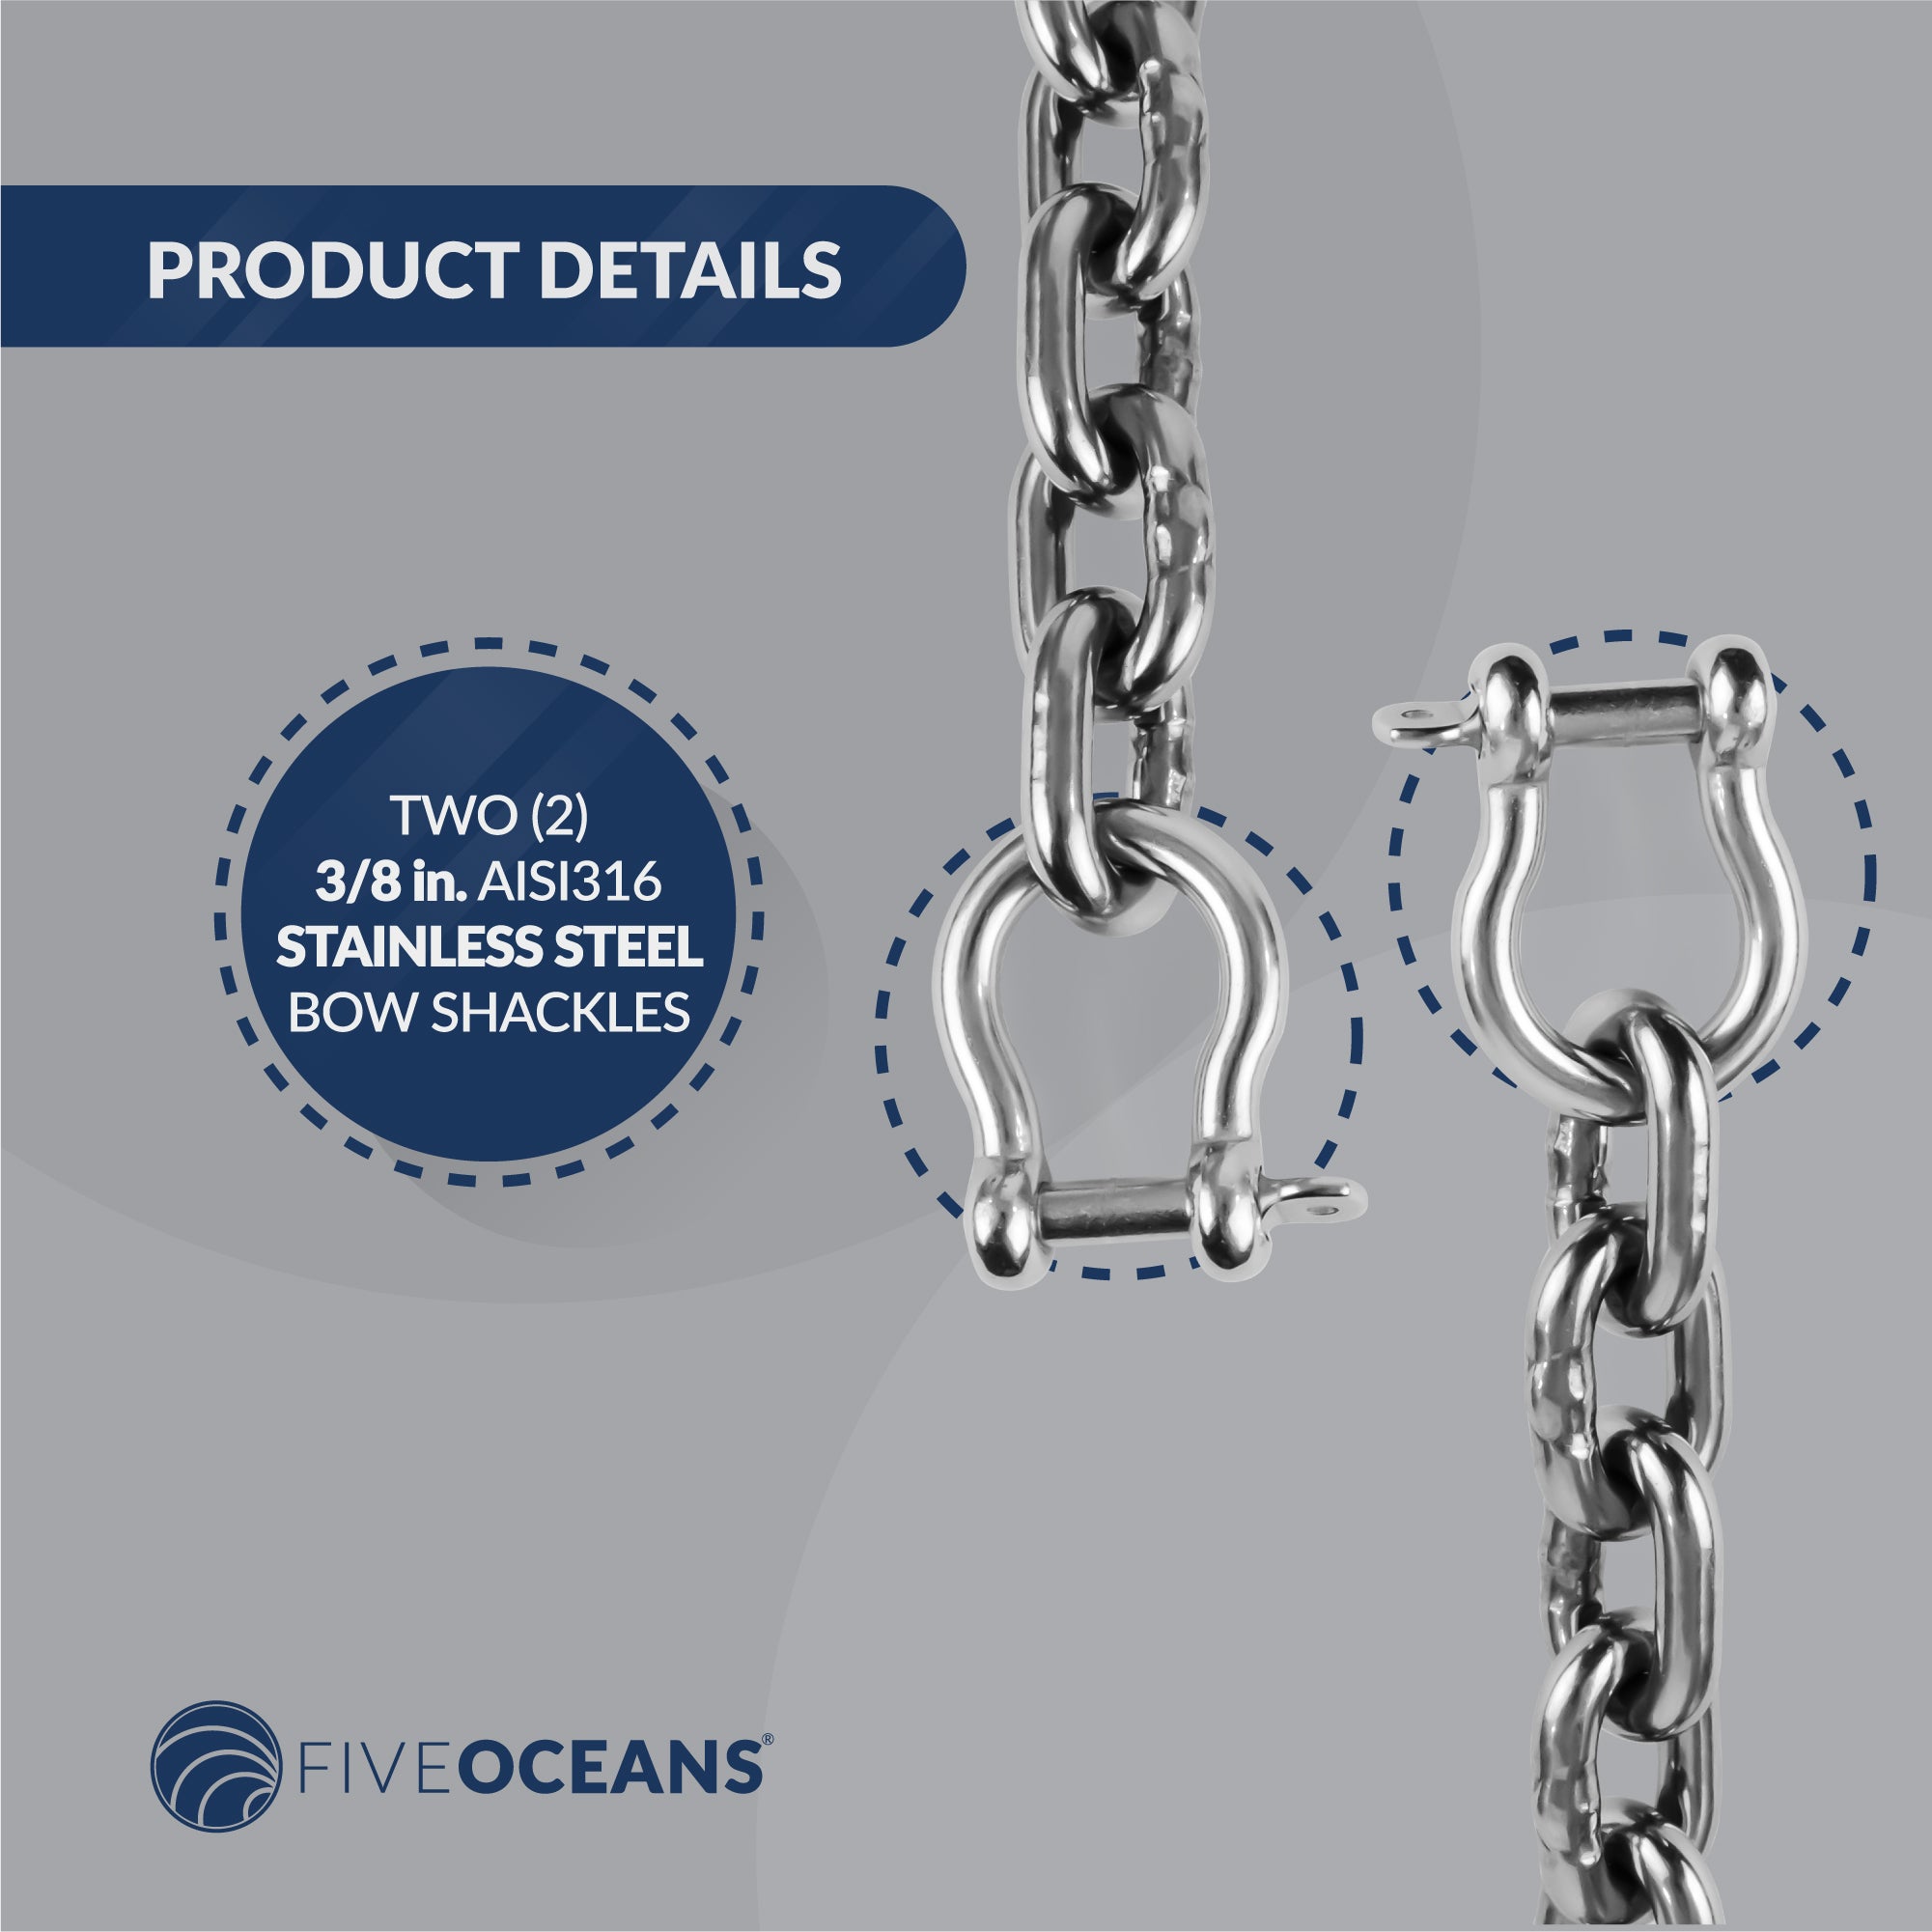 Boat Anchor Lead Chain with Shackles, 3/8" x 10', HTG4 Stainless Steel - FO4494-S10